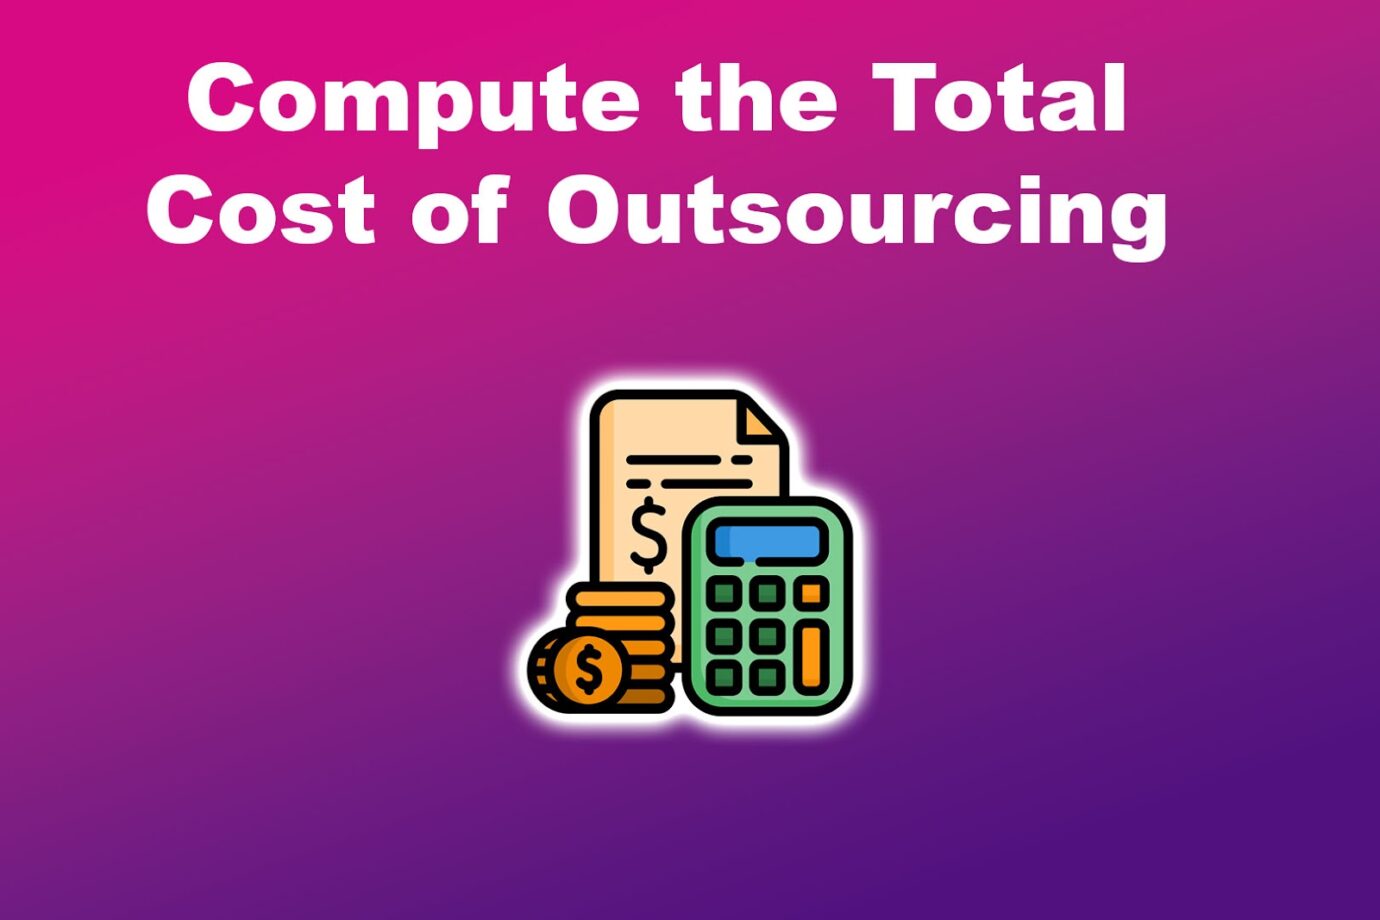 Compute the Total Cost of Outsourcing